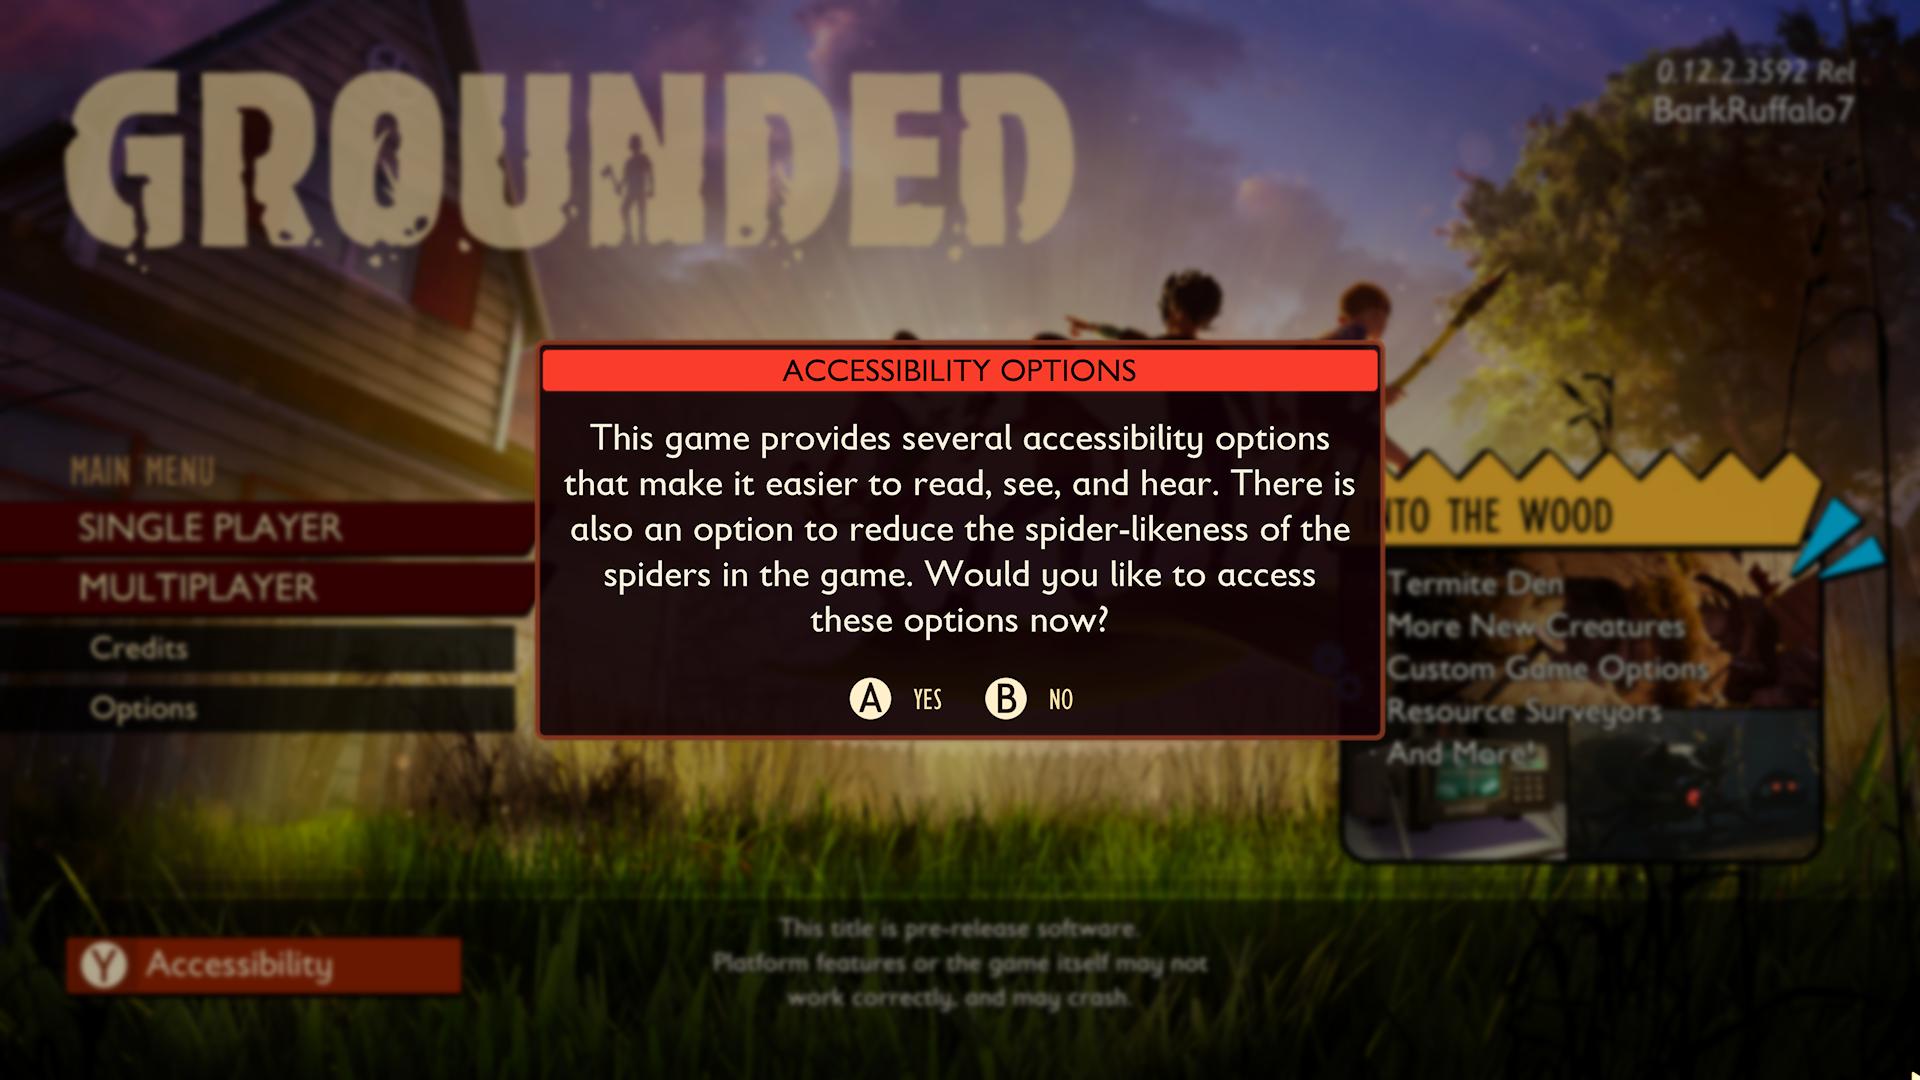 A screenshot from Grounded with a warning screen that states, "Arachnophobia. This game contains spiders that are often much larger than the player. If you're super not okay with that, you can enable Arachnophobia Safe Mode in the Accessibility options. This is a visual-only setting that does not affect gameplay or difficulty."